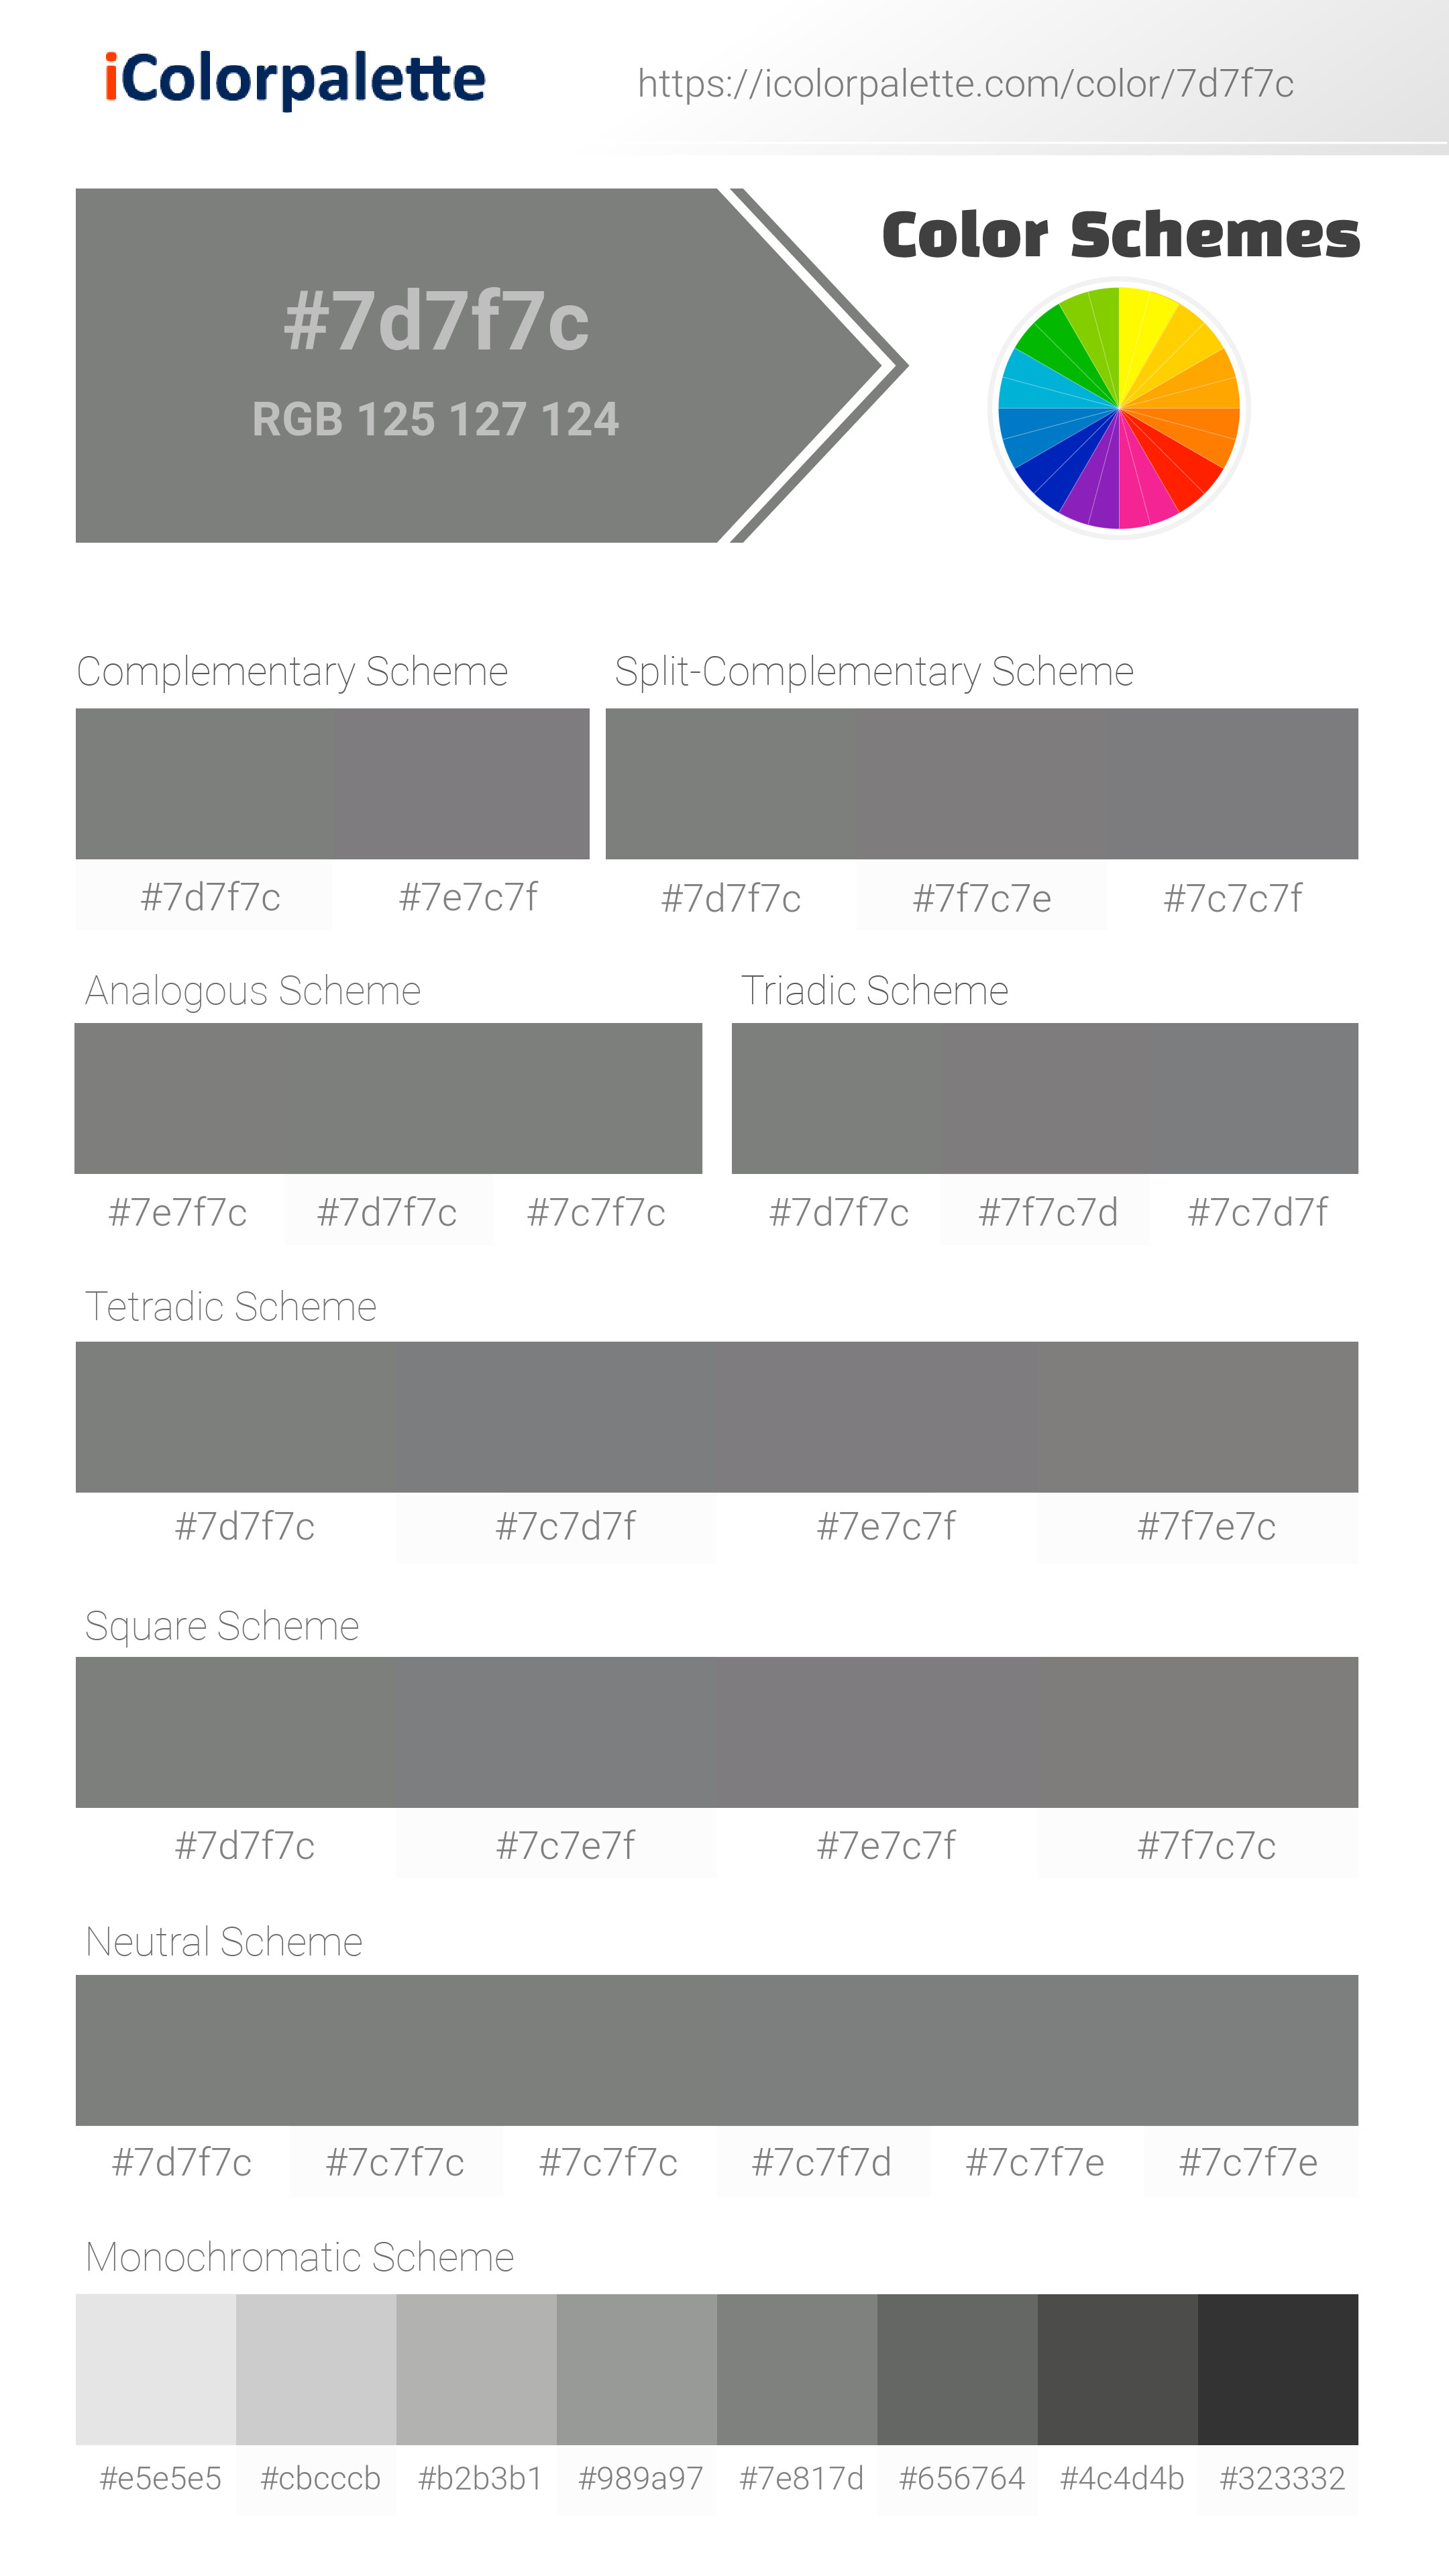 About Medium Gray - Color codes, similar colors and paints 